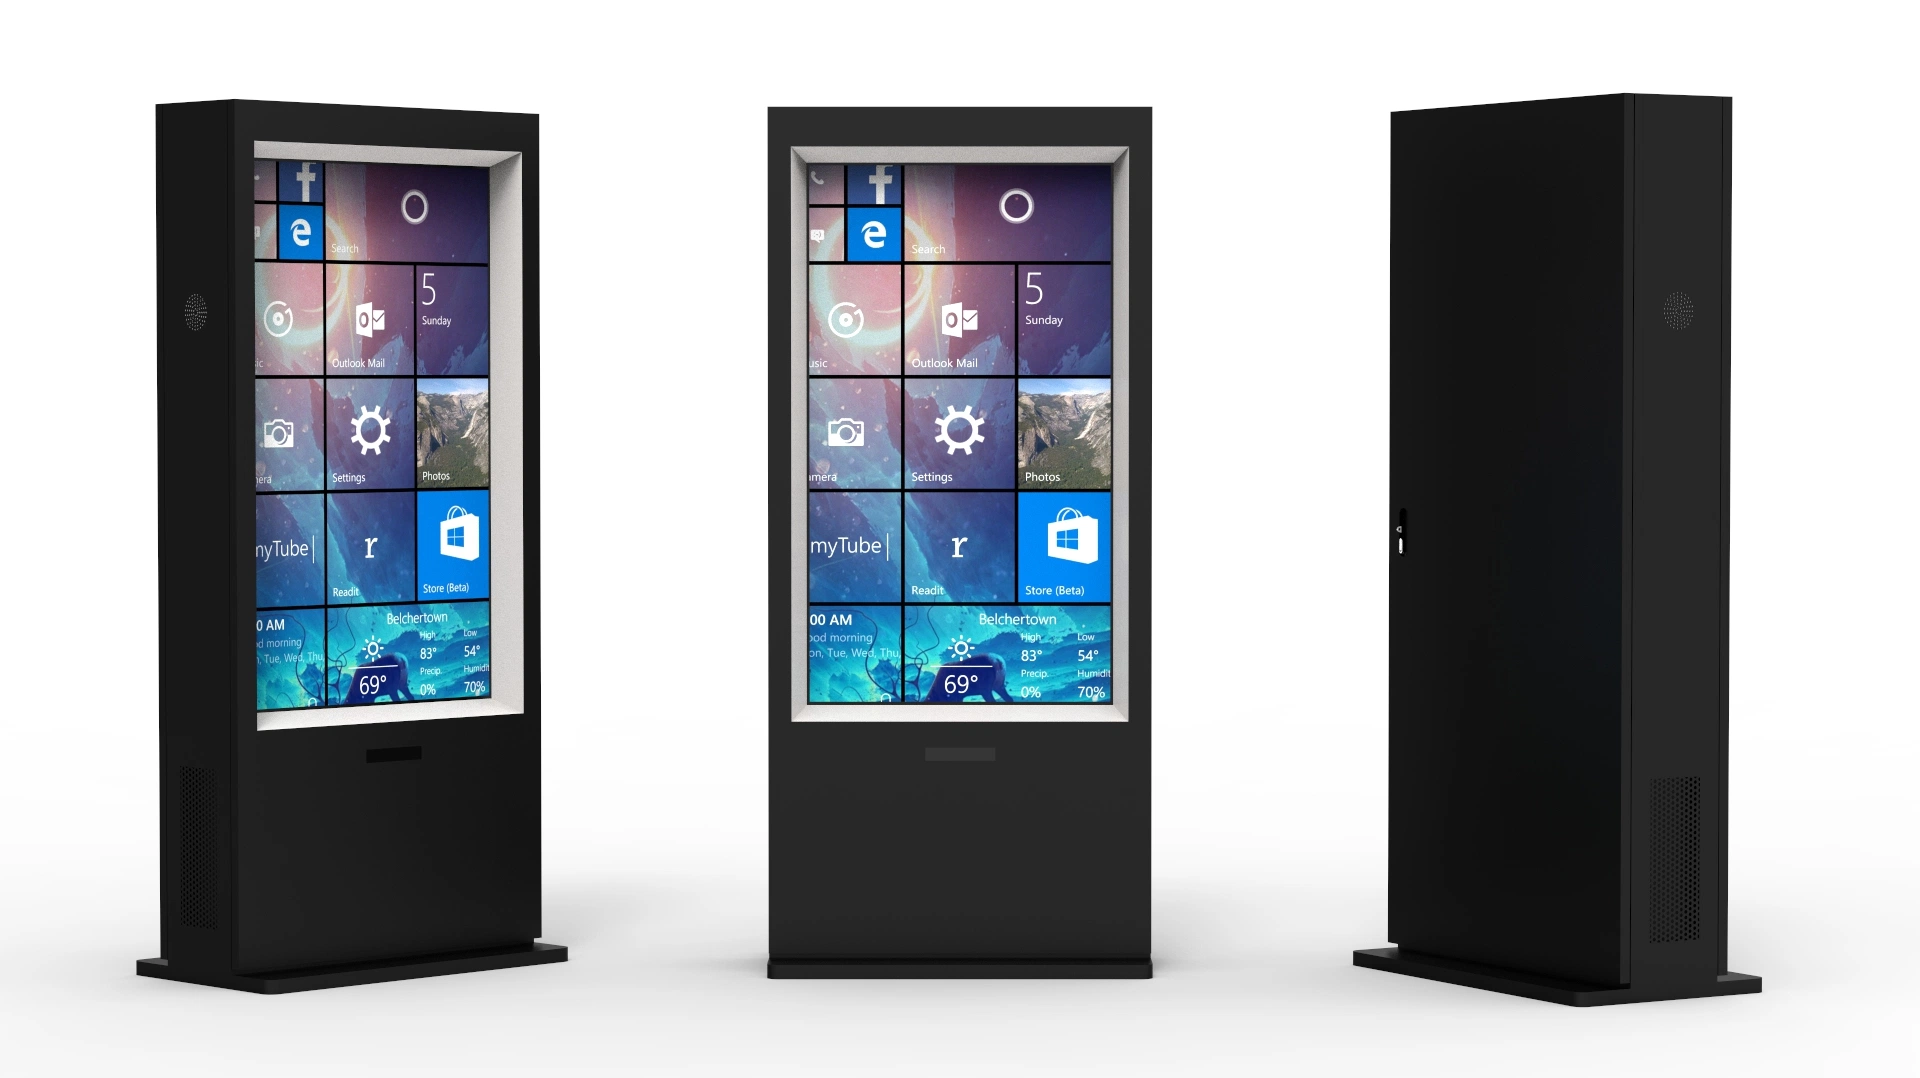 Solar Powered Touch Screen IP65 Outdoor LCD Digital Signage Advertising Info Kiosk High Brightness 3000nit Display